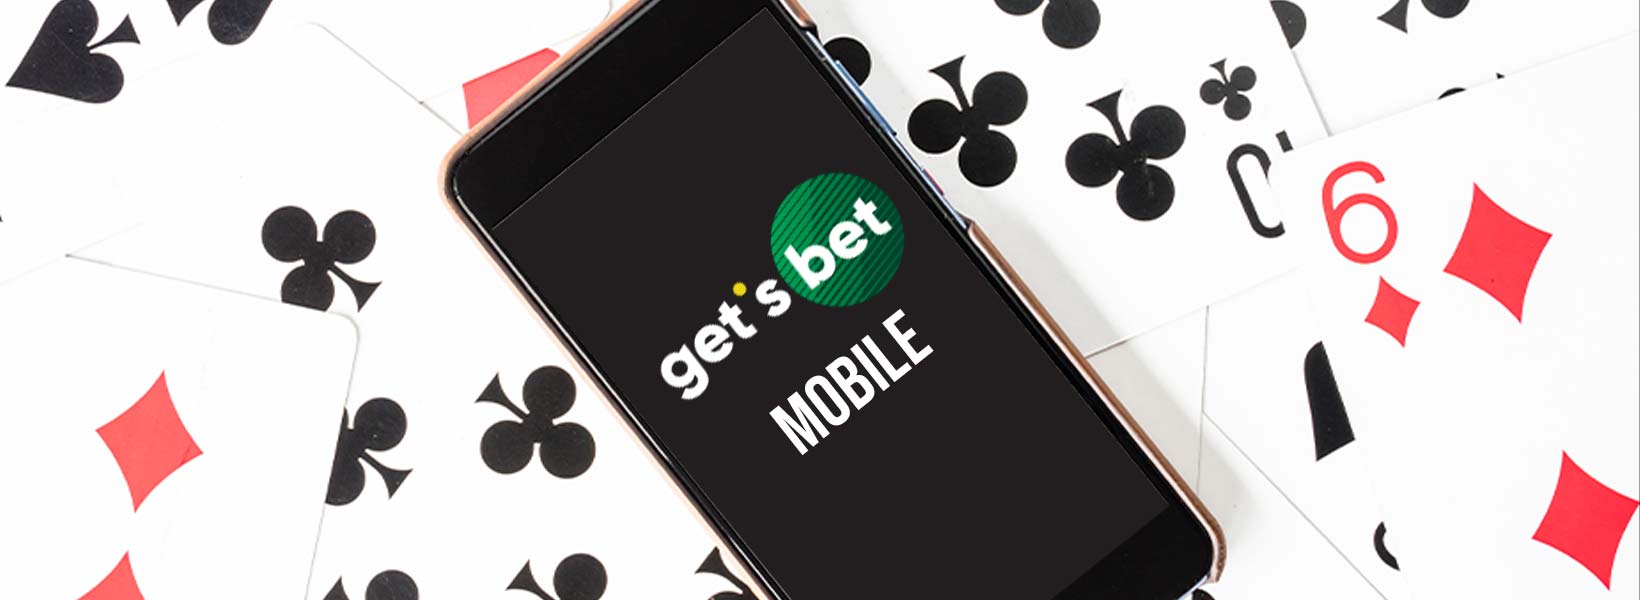 gets bet mobile